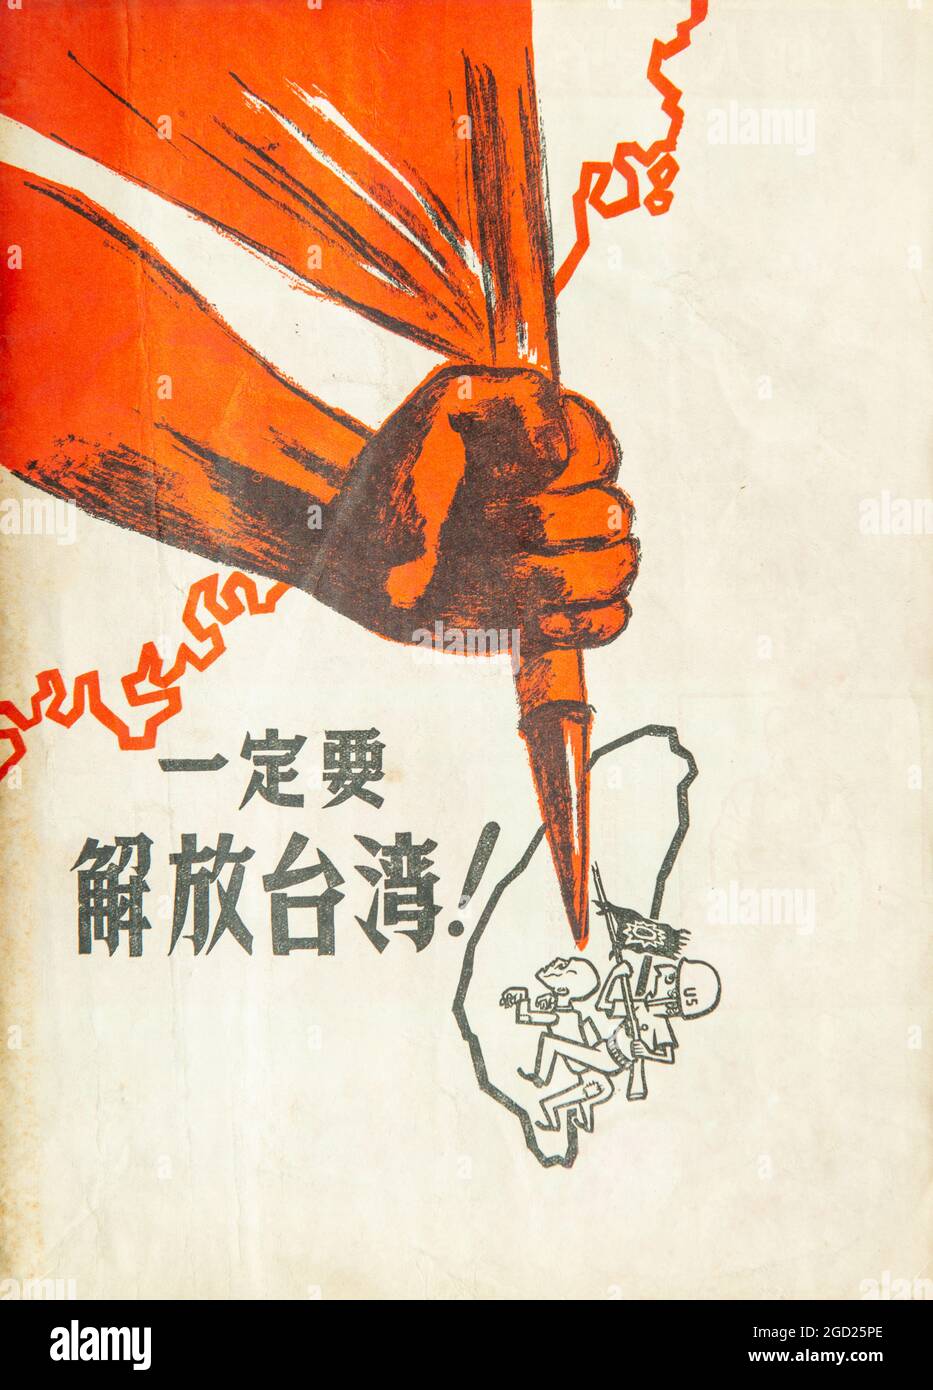 A 1958 propaganda poster. Chinese characters in the picture: Taiwan must be liberated. Stock Photo